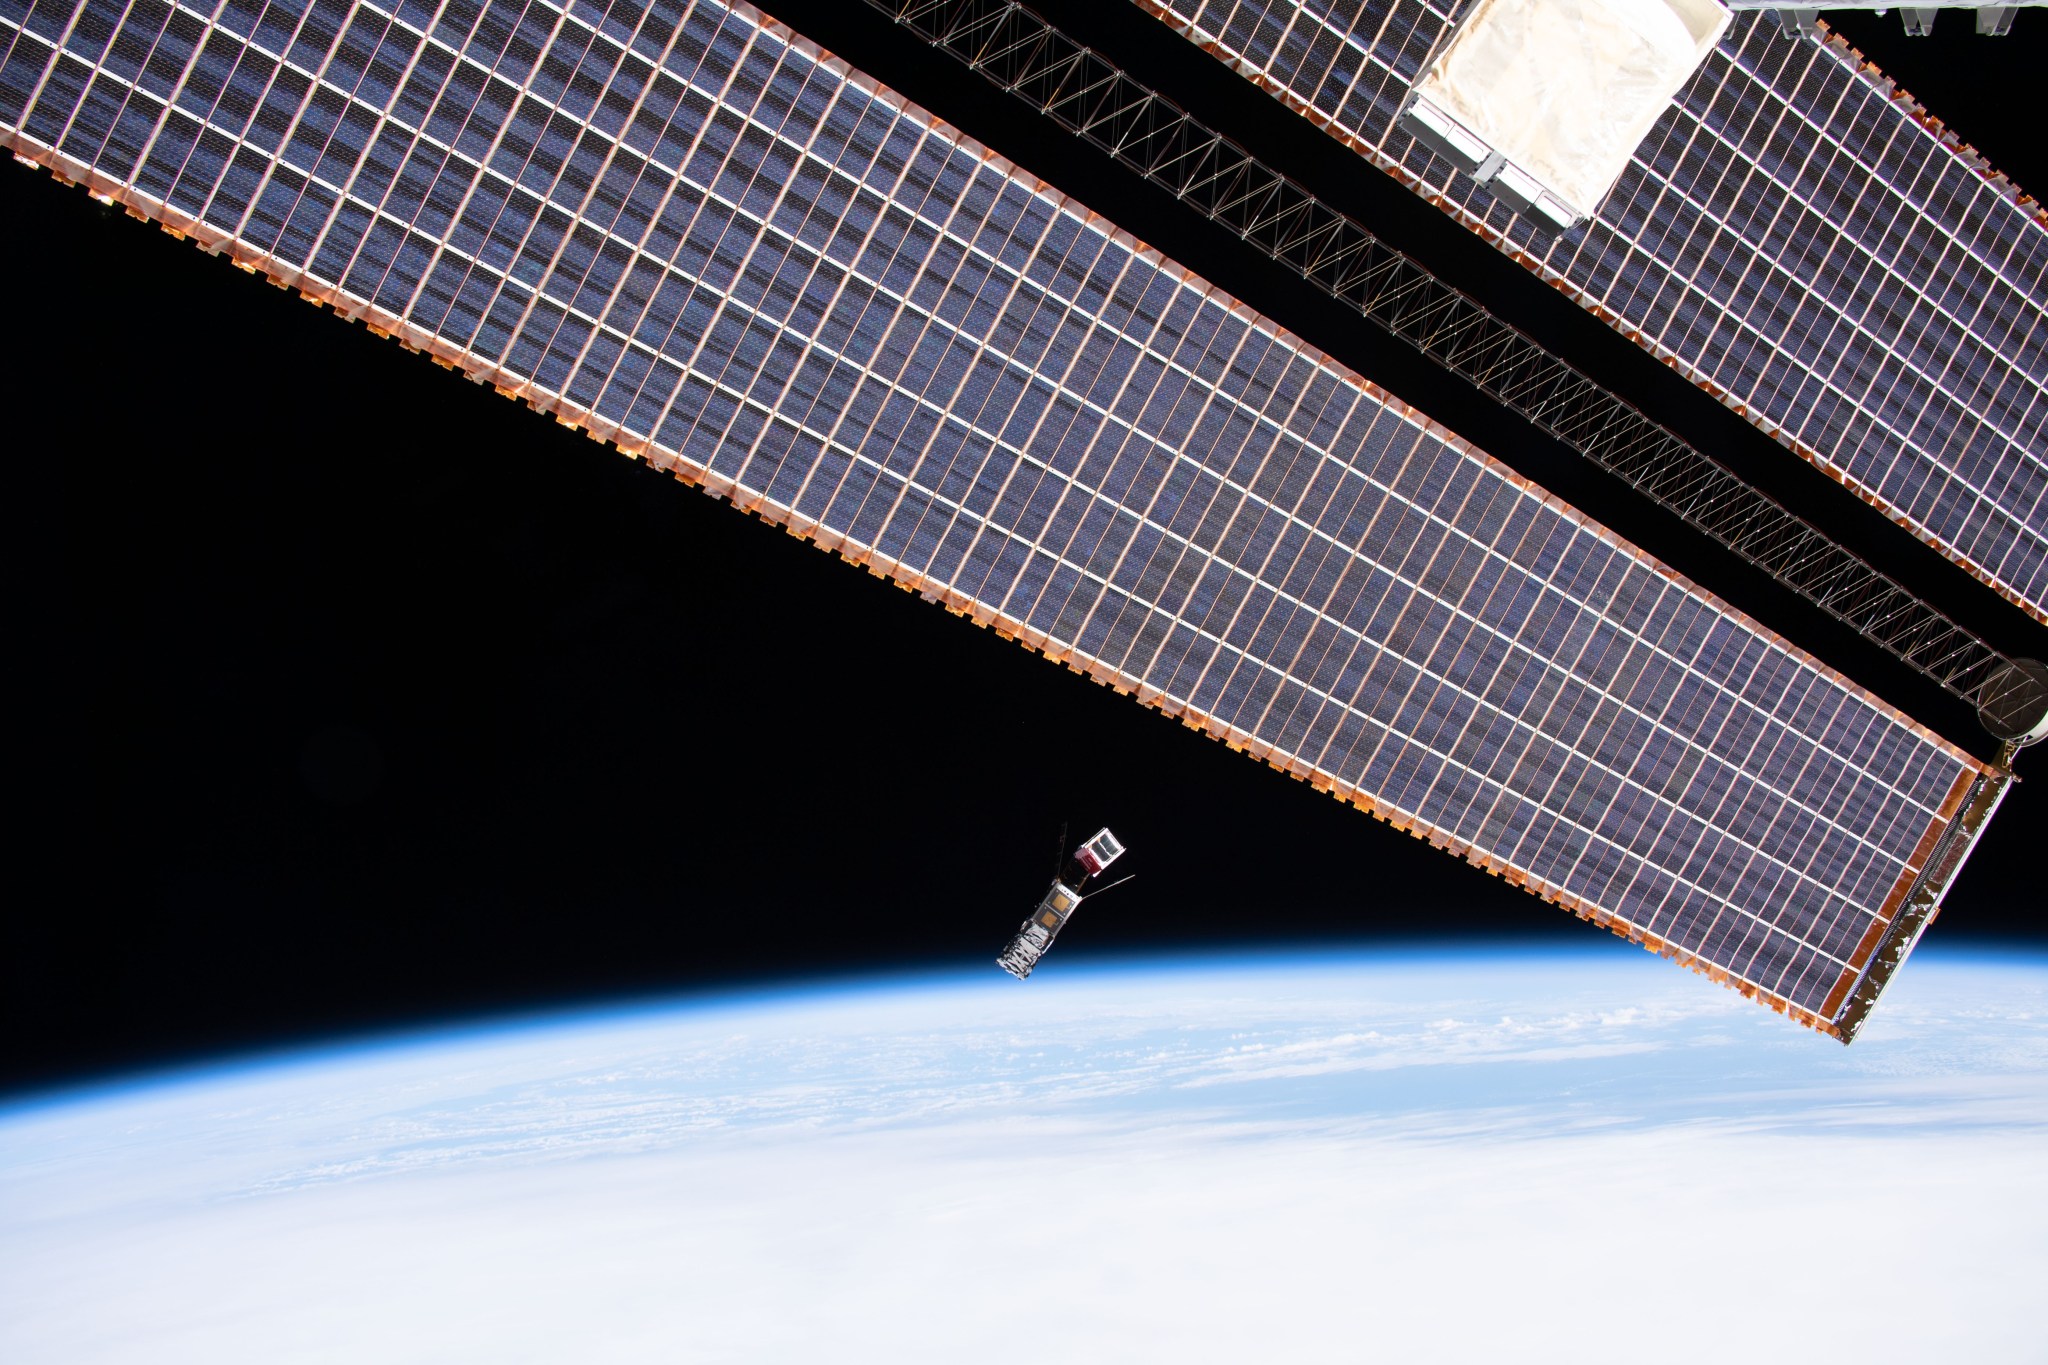 AzTechSat-1 being deployed from the International Space Station